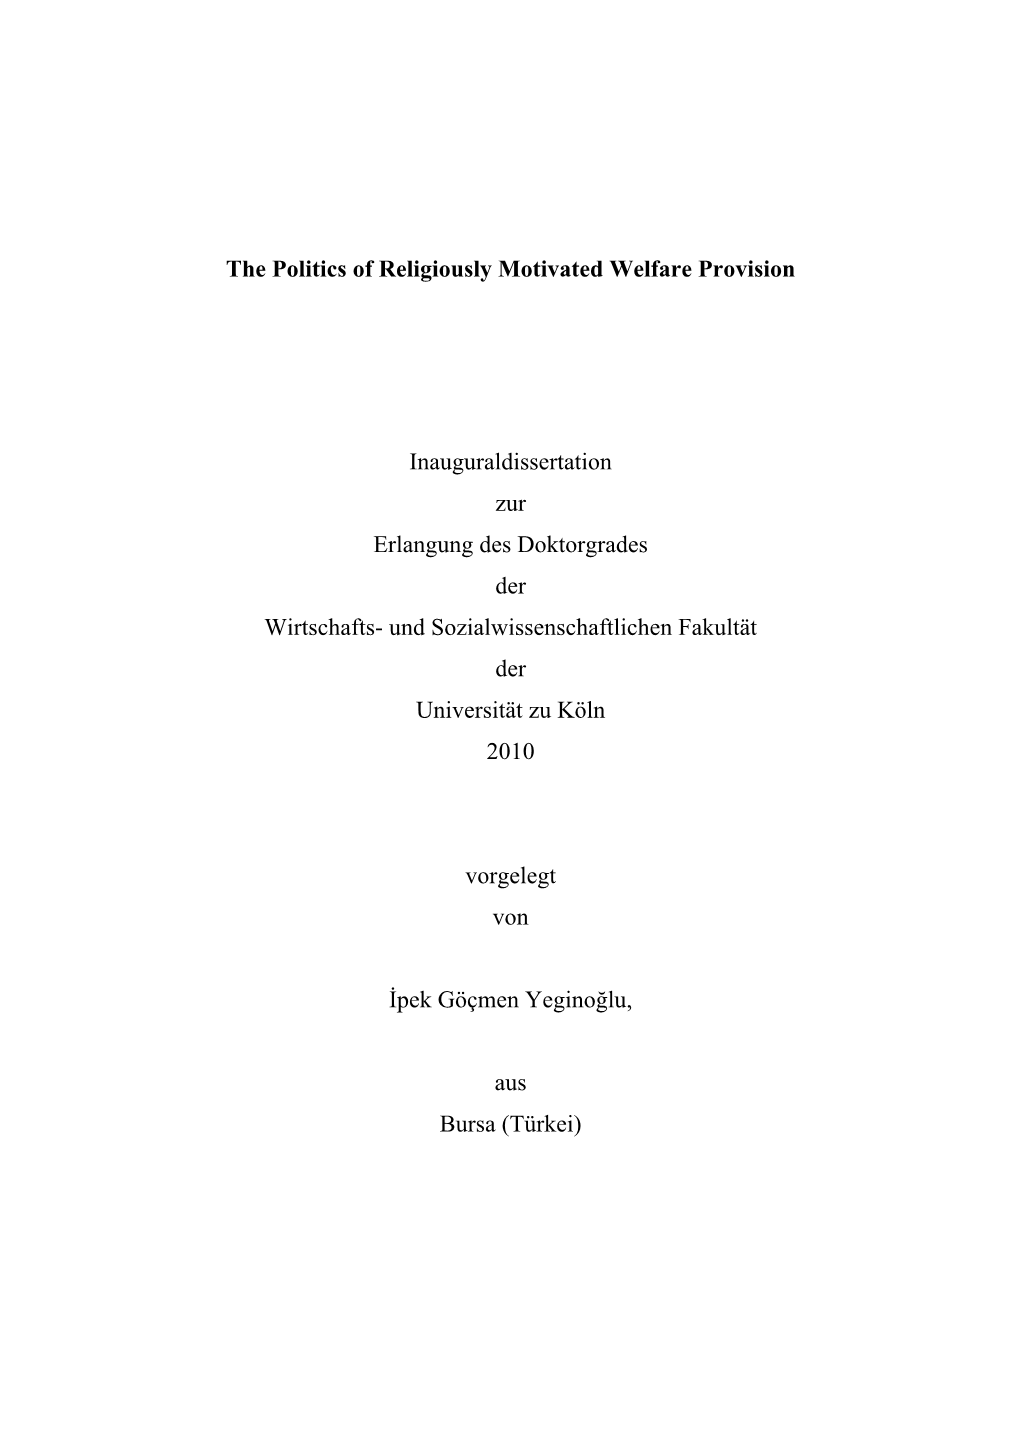 The Politics of Religiously Motivated Welfare Provision